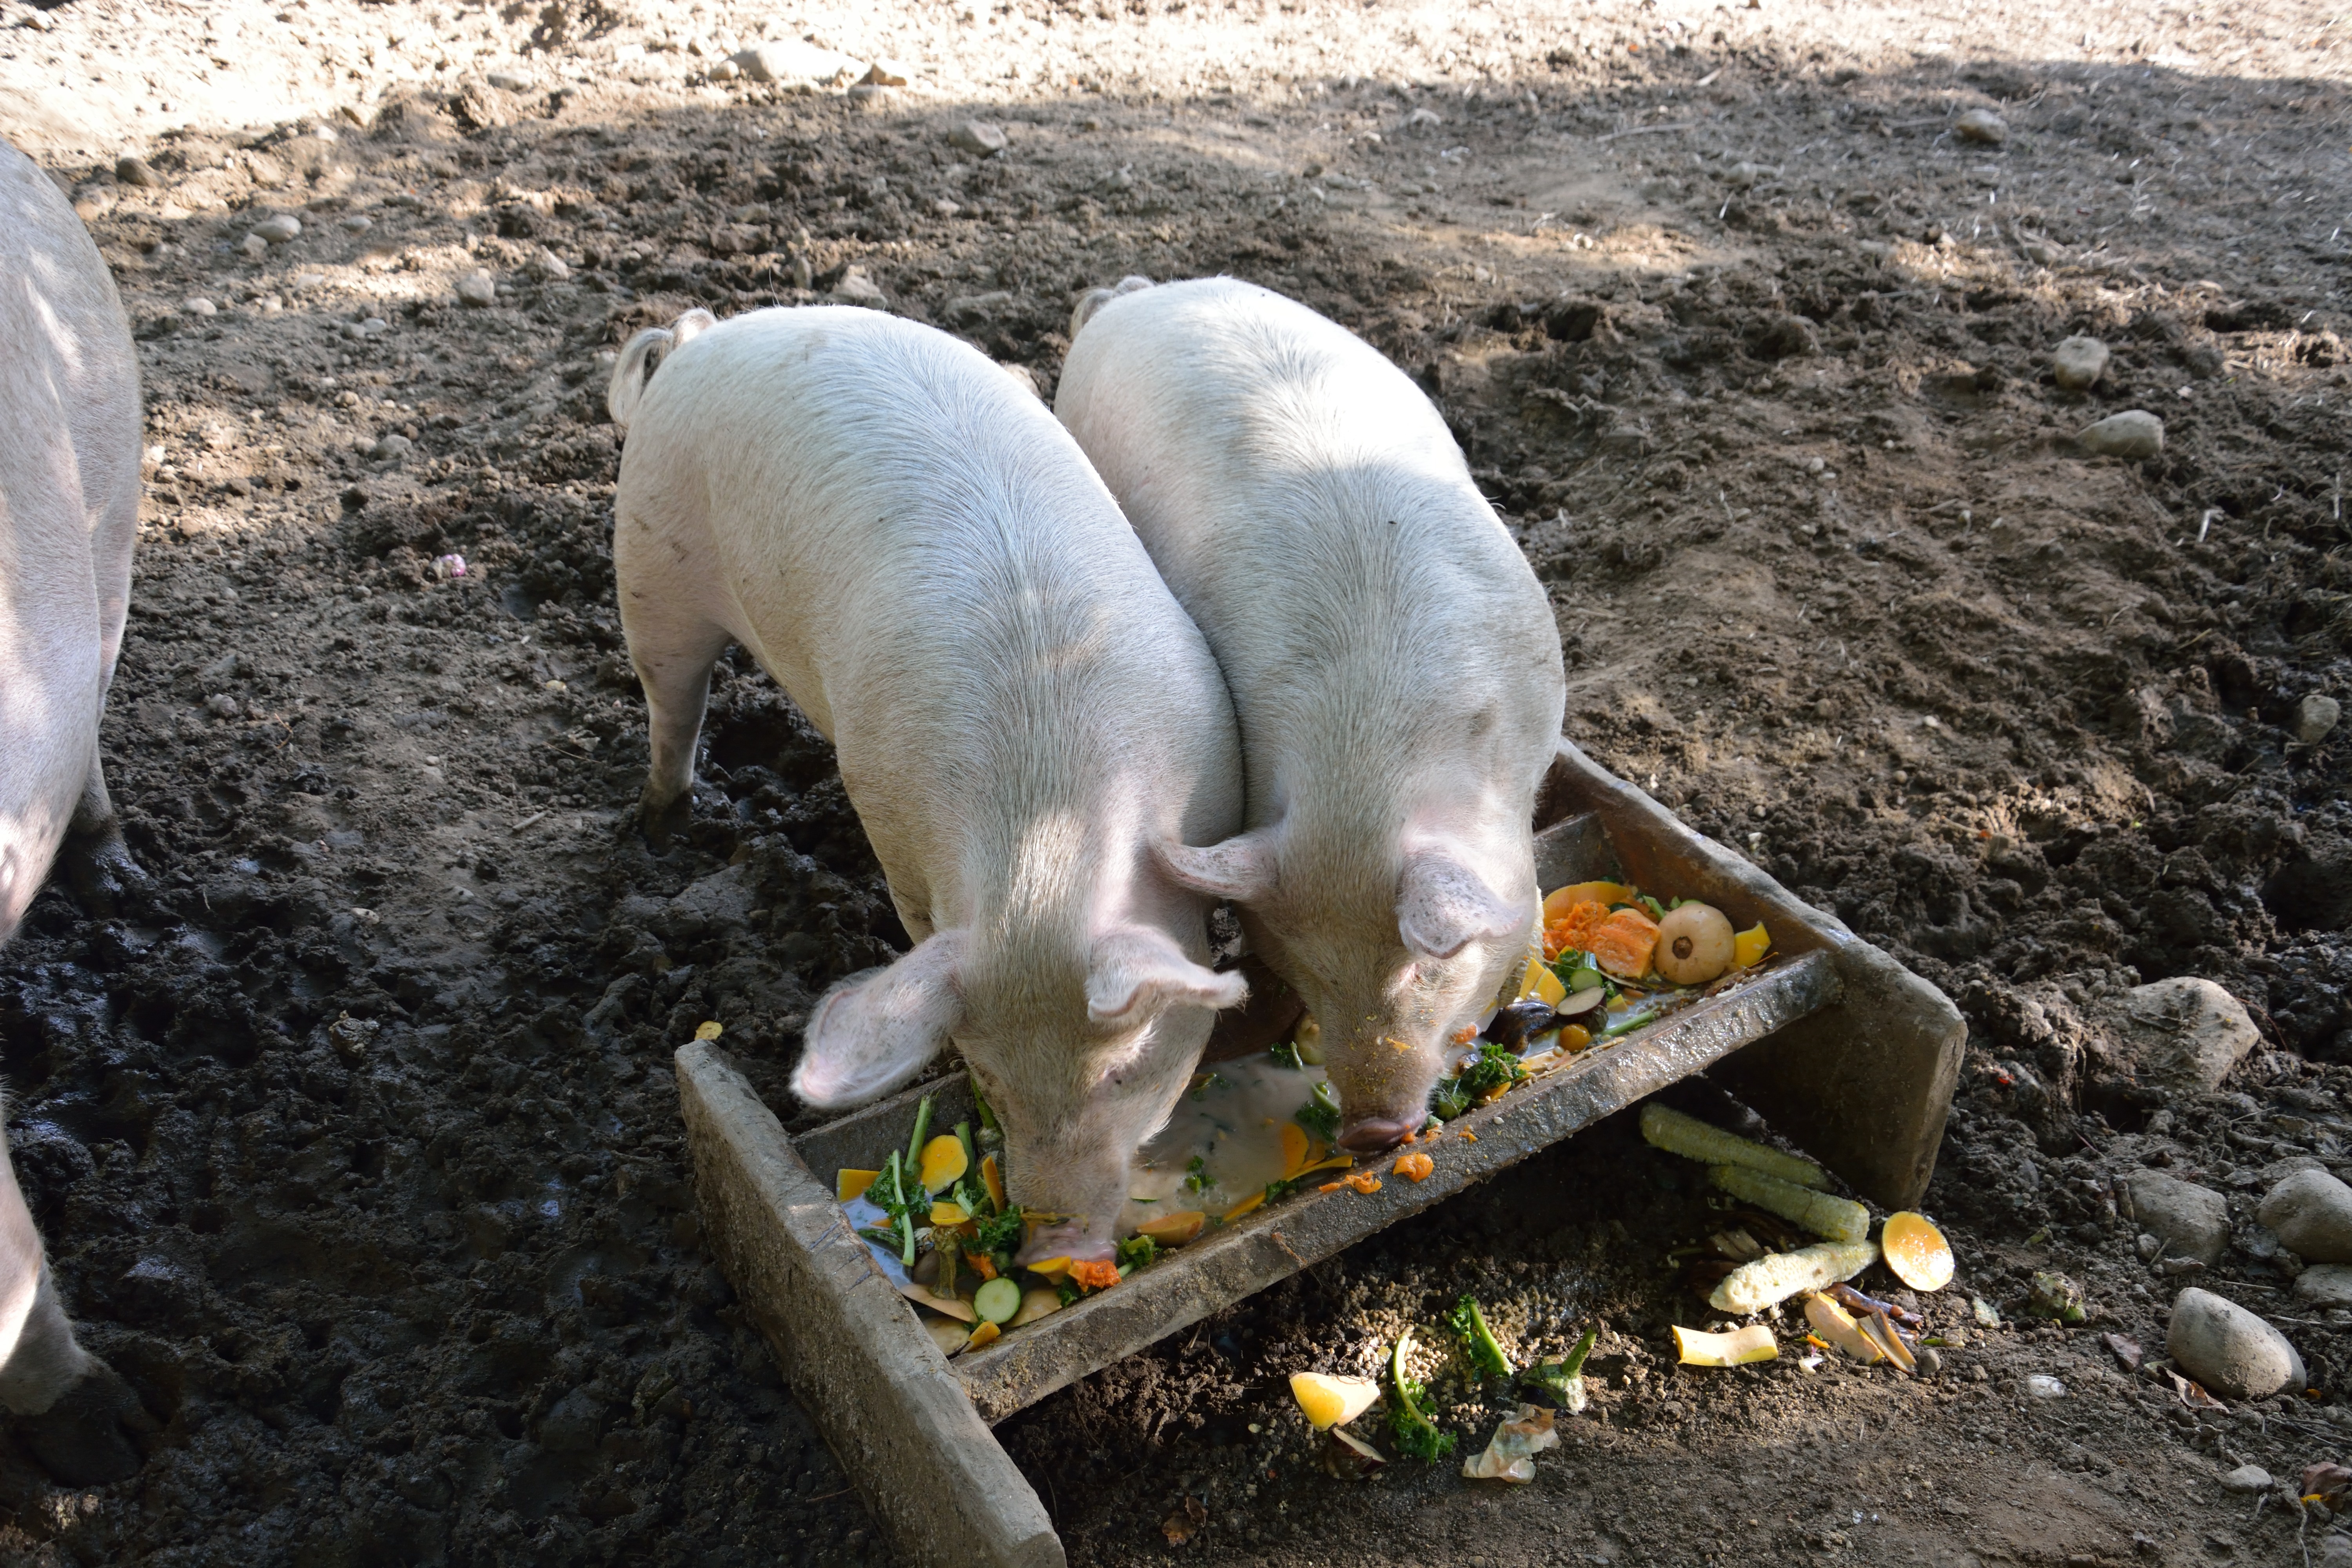 A pair of pigs eating from a trough